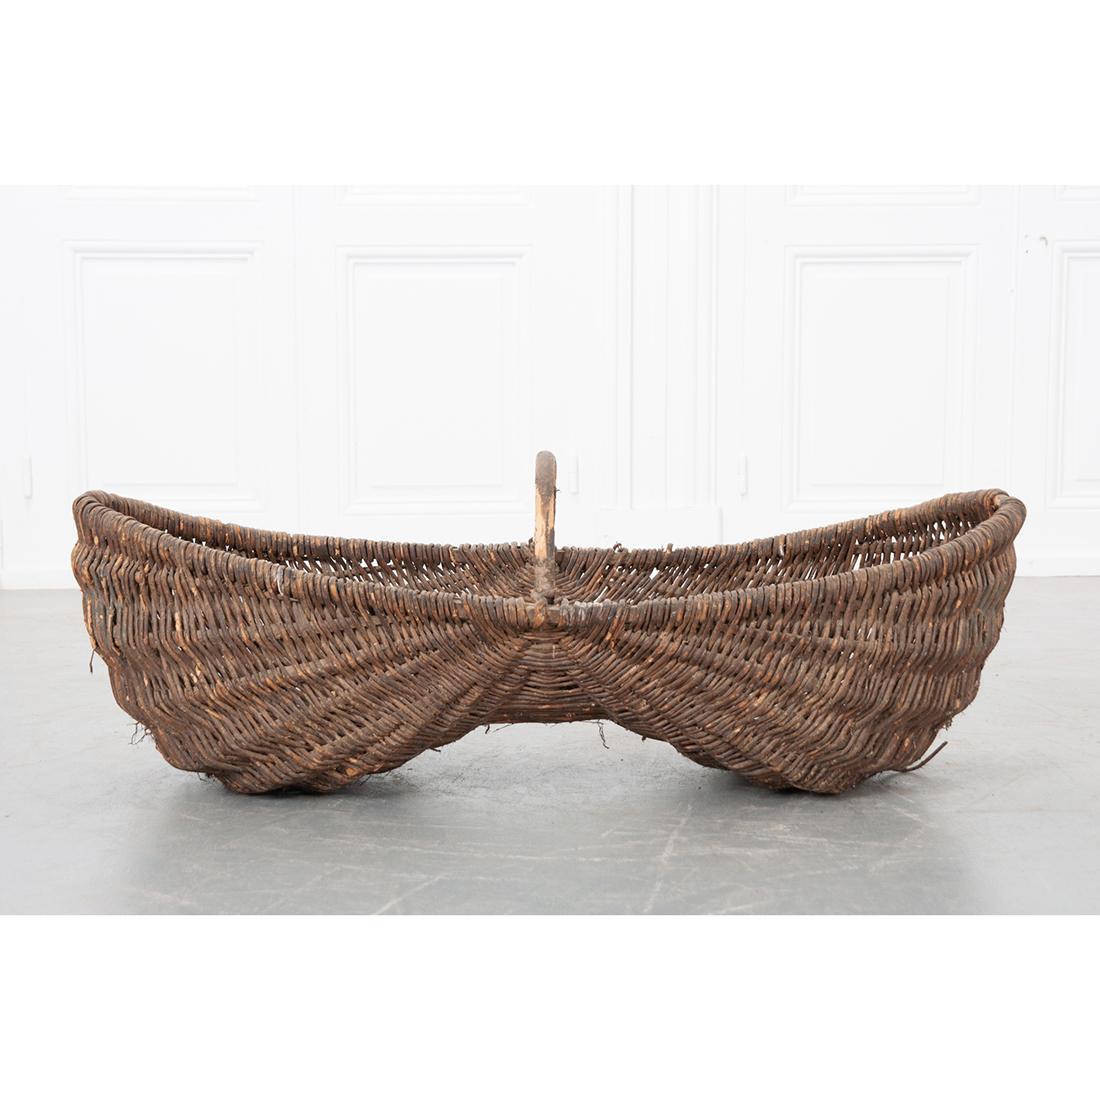 Decorate with this antique, grape harvest, gathering basket. Created in the Burgundy region of France, circa 1890. This unique basket is made of handwoven wicker is a capsule shape and features a wooden frame with arched handle across the top. This